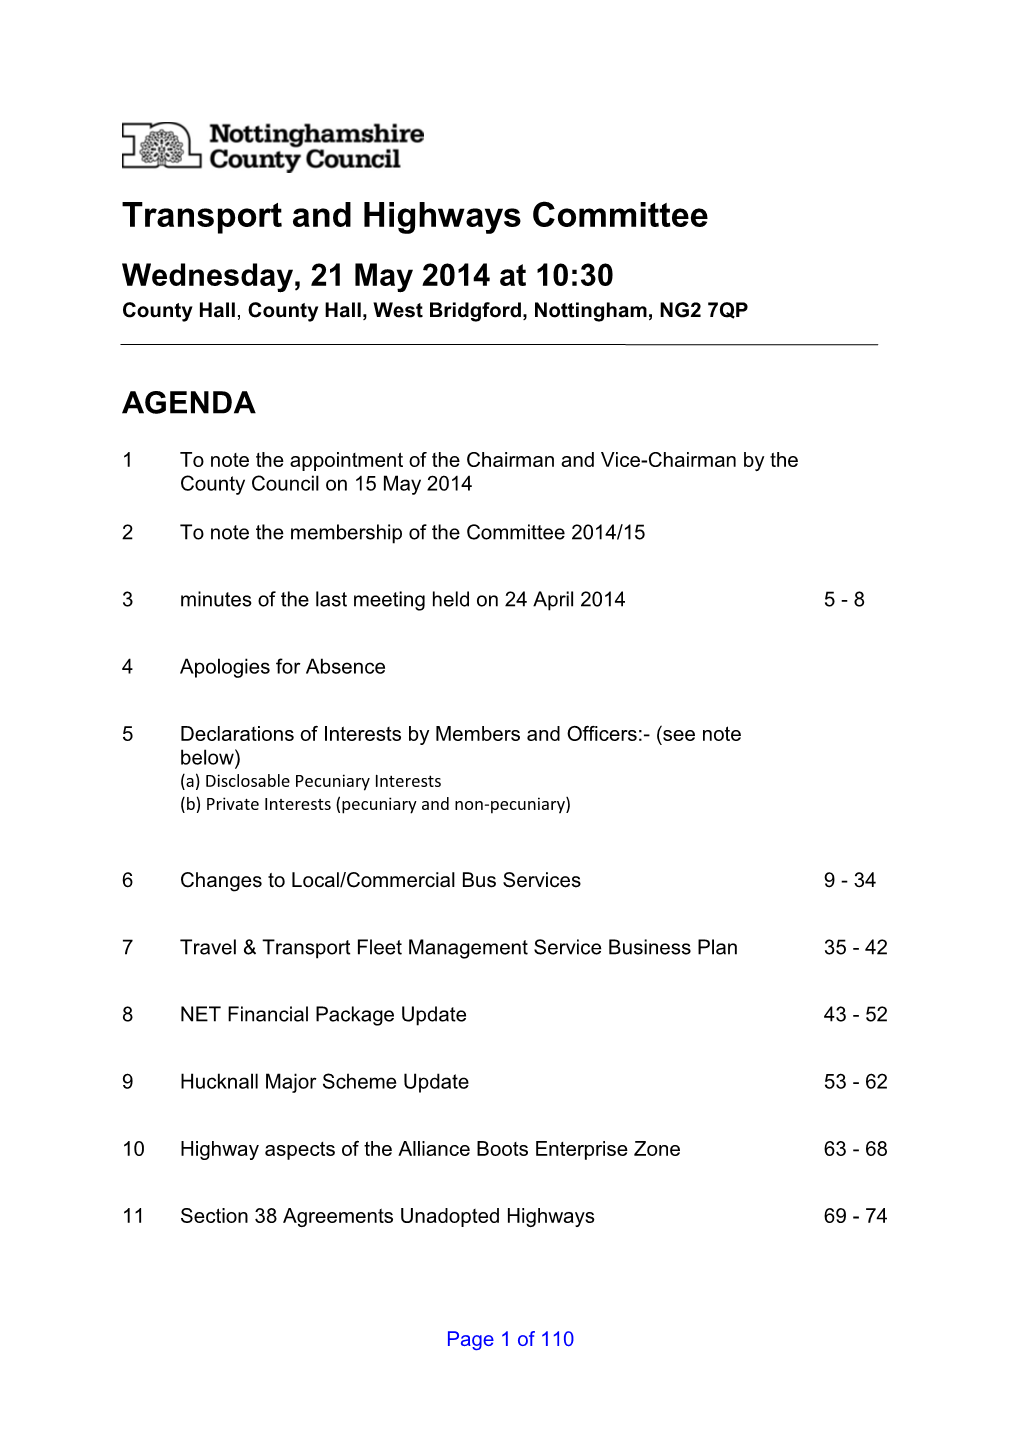 Transport and Highways Committee Wednesday, 21 May 2014 at 10:30 County Hall , County Hall, West Bridgford, Nottingham, NG2 7QP